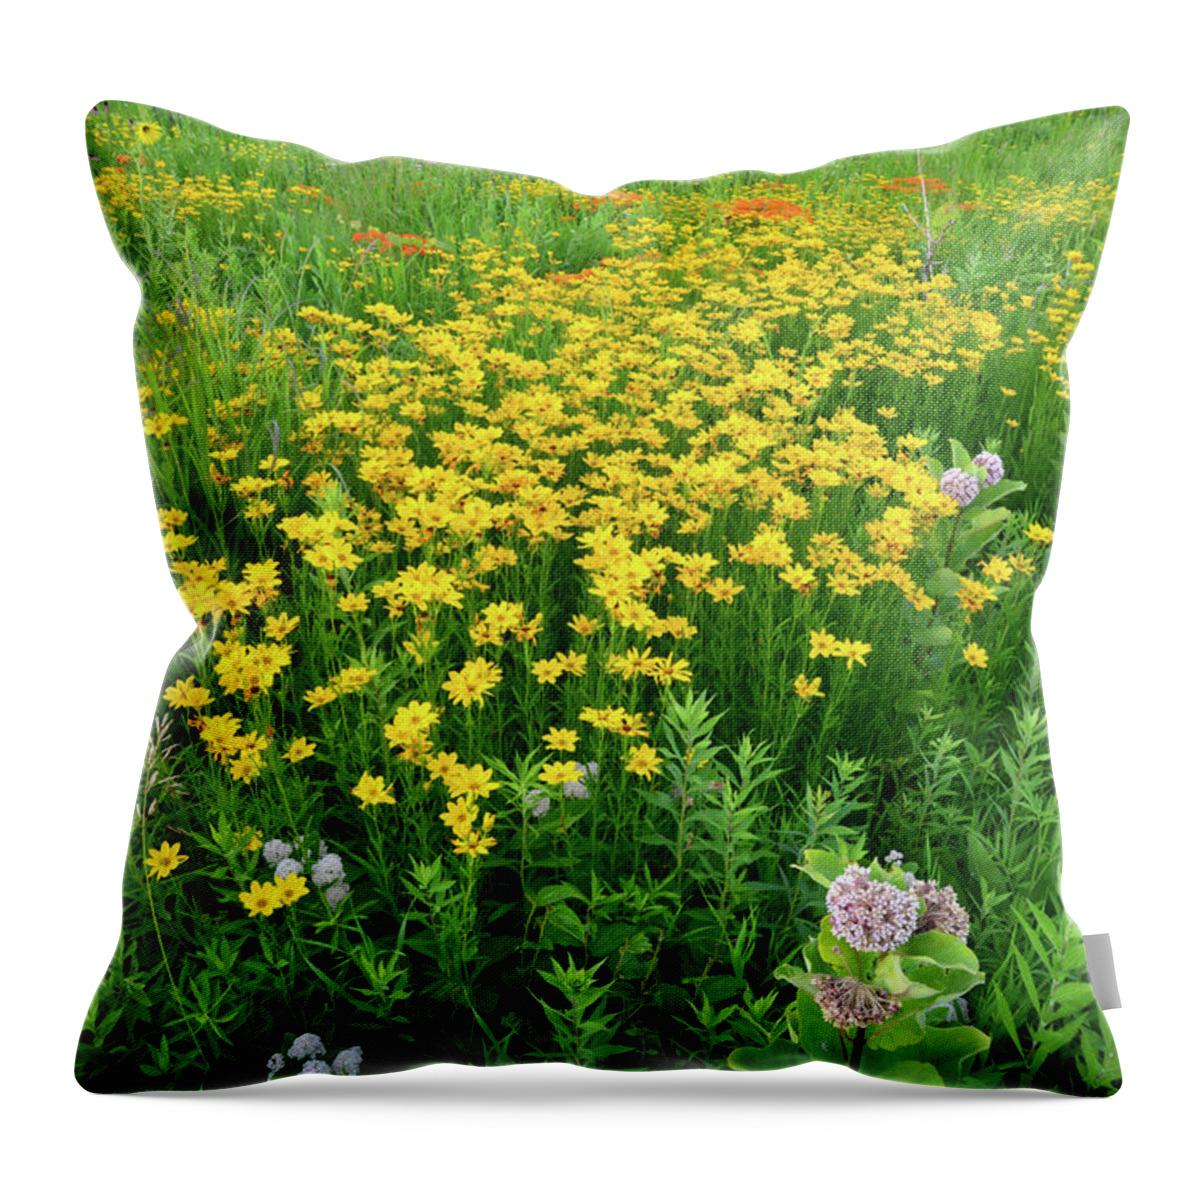 Illinois Throw Pillow featuring the photograph Illinois Prairie Wildflowers by Ray Mathis